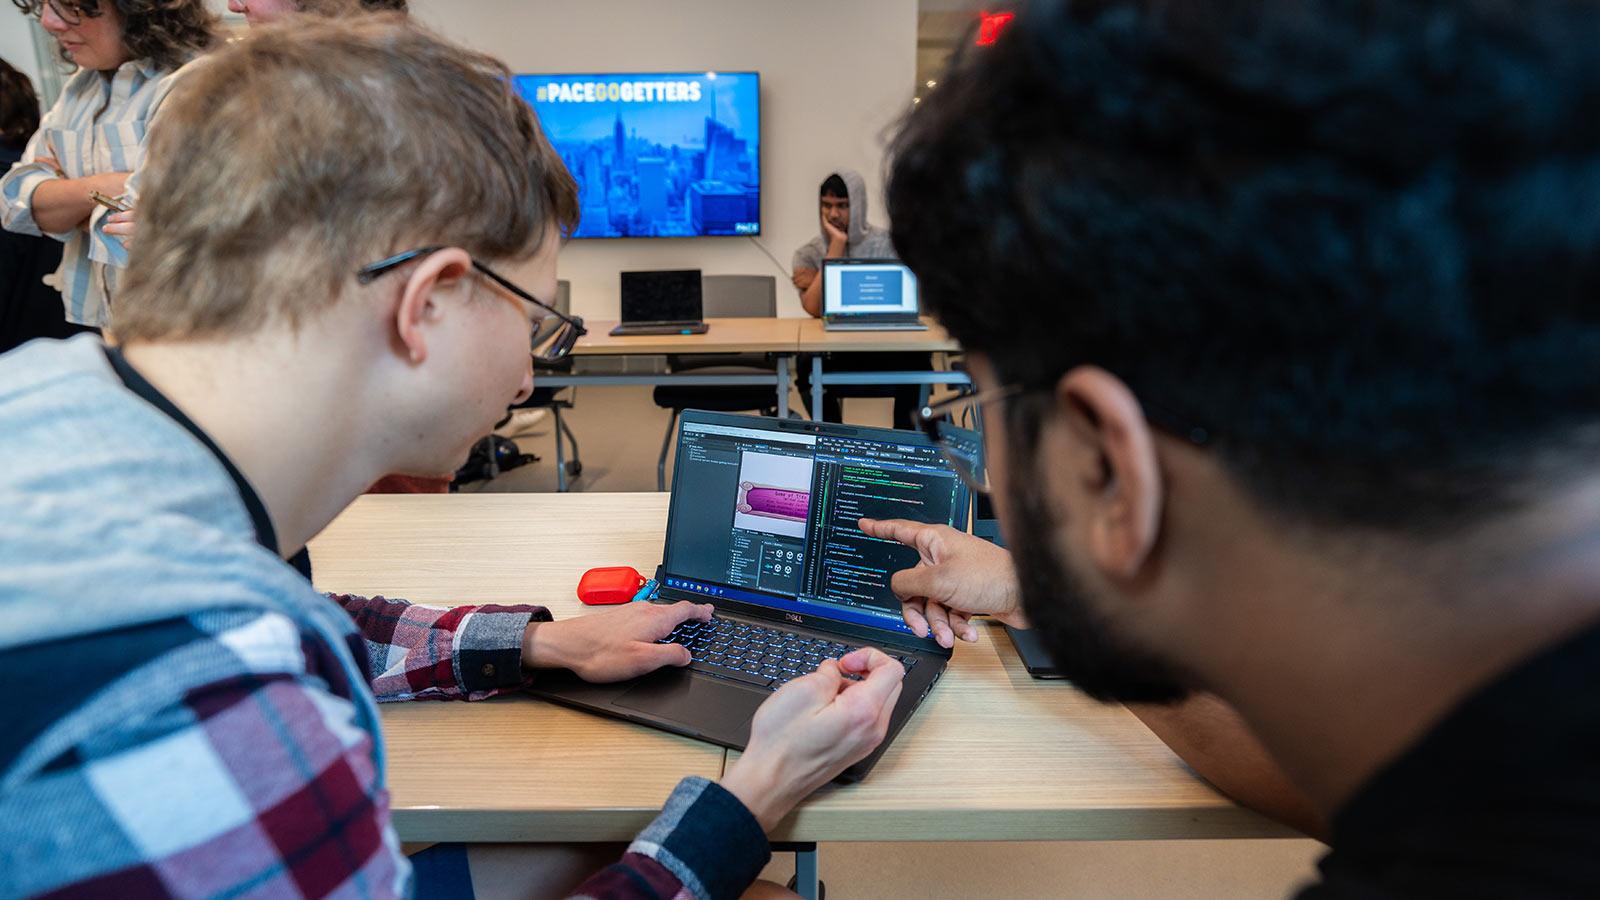 Two Pace students point at a video game on a laptop screen